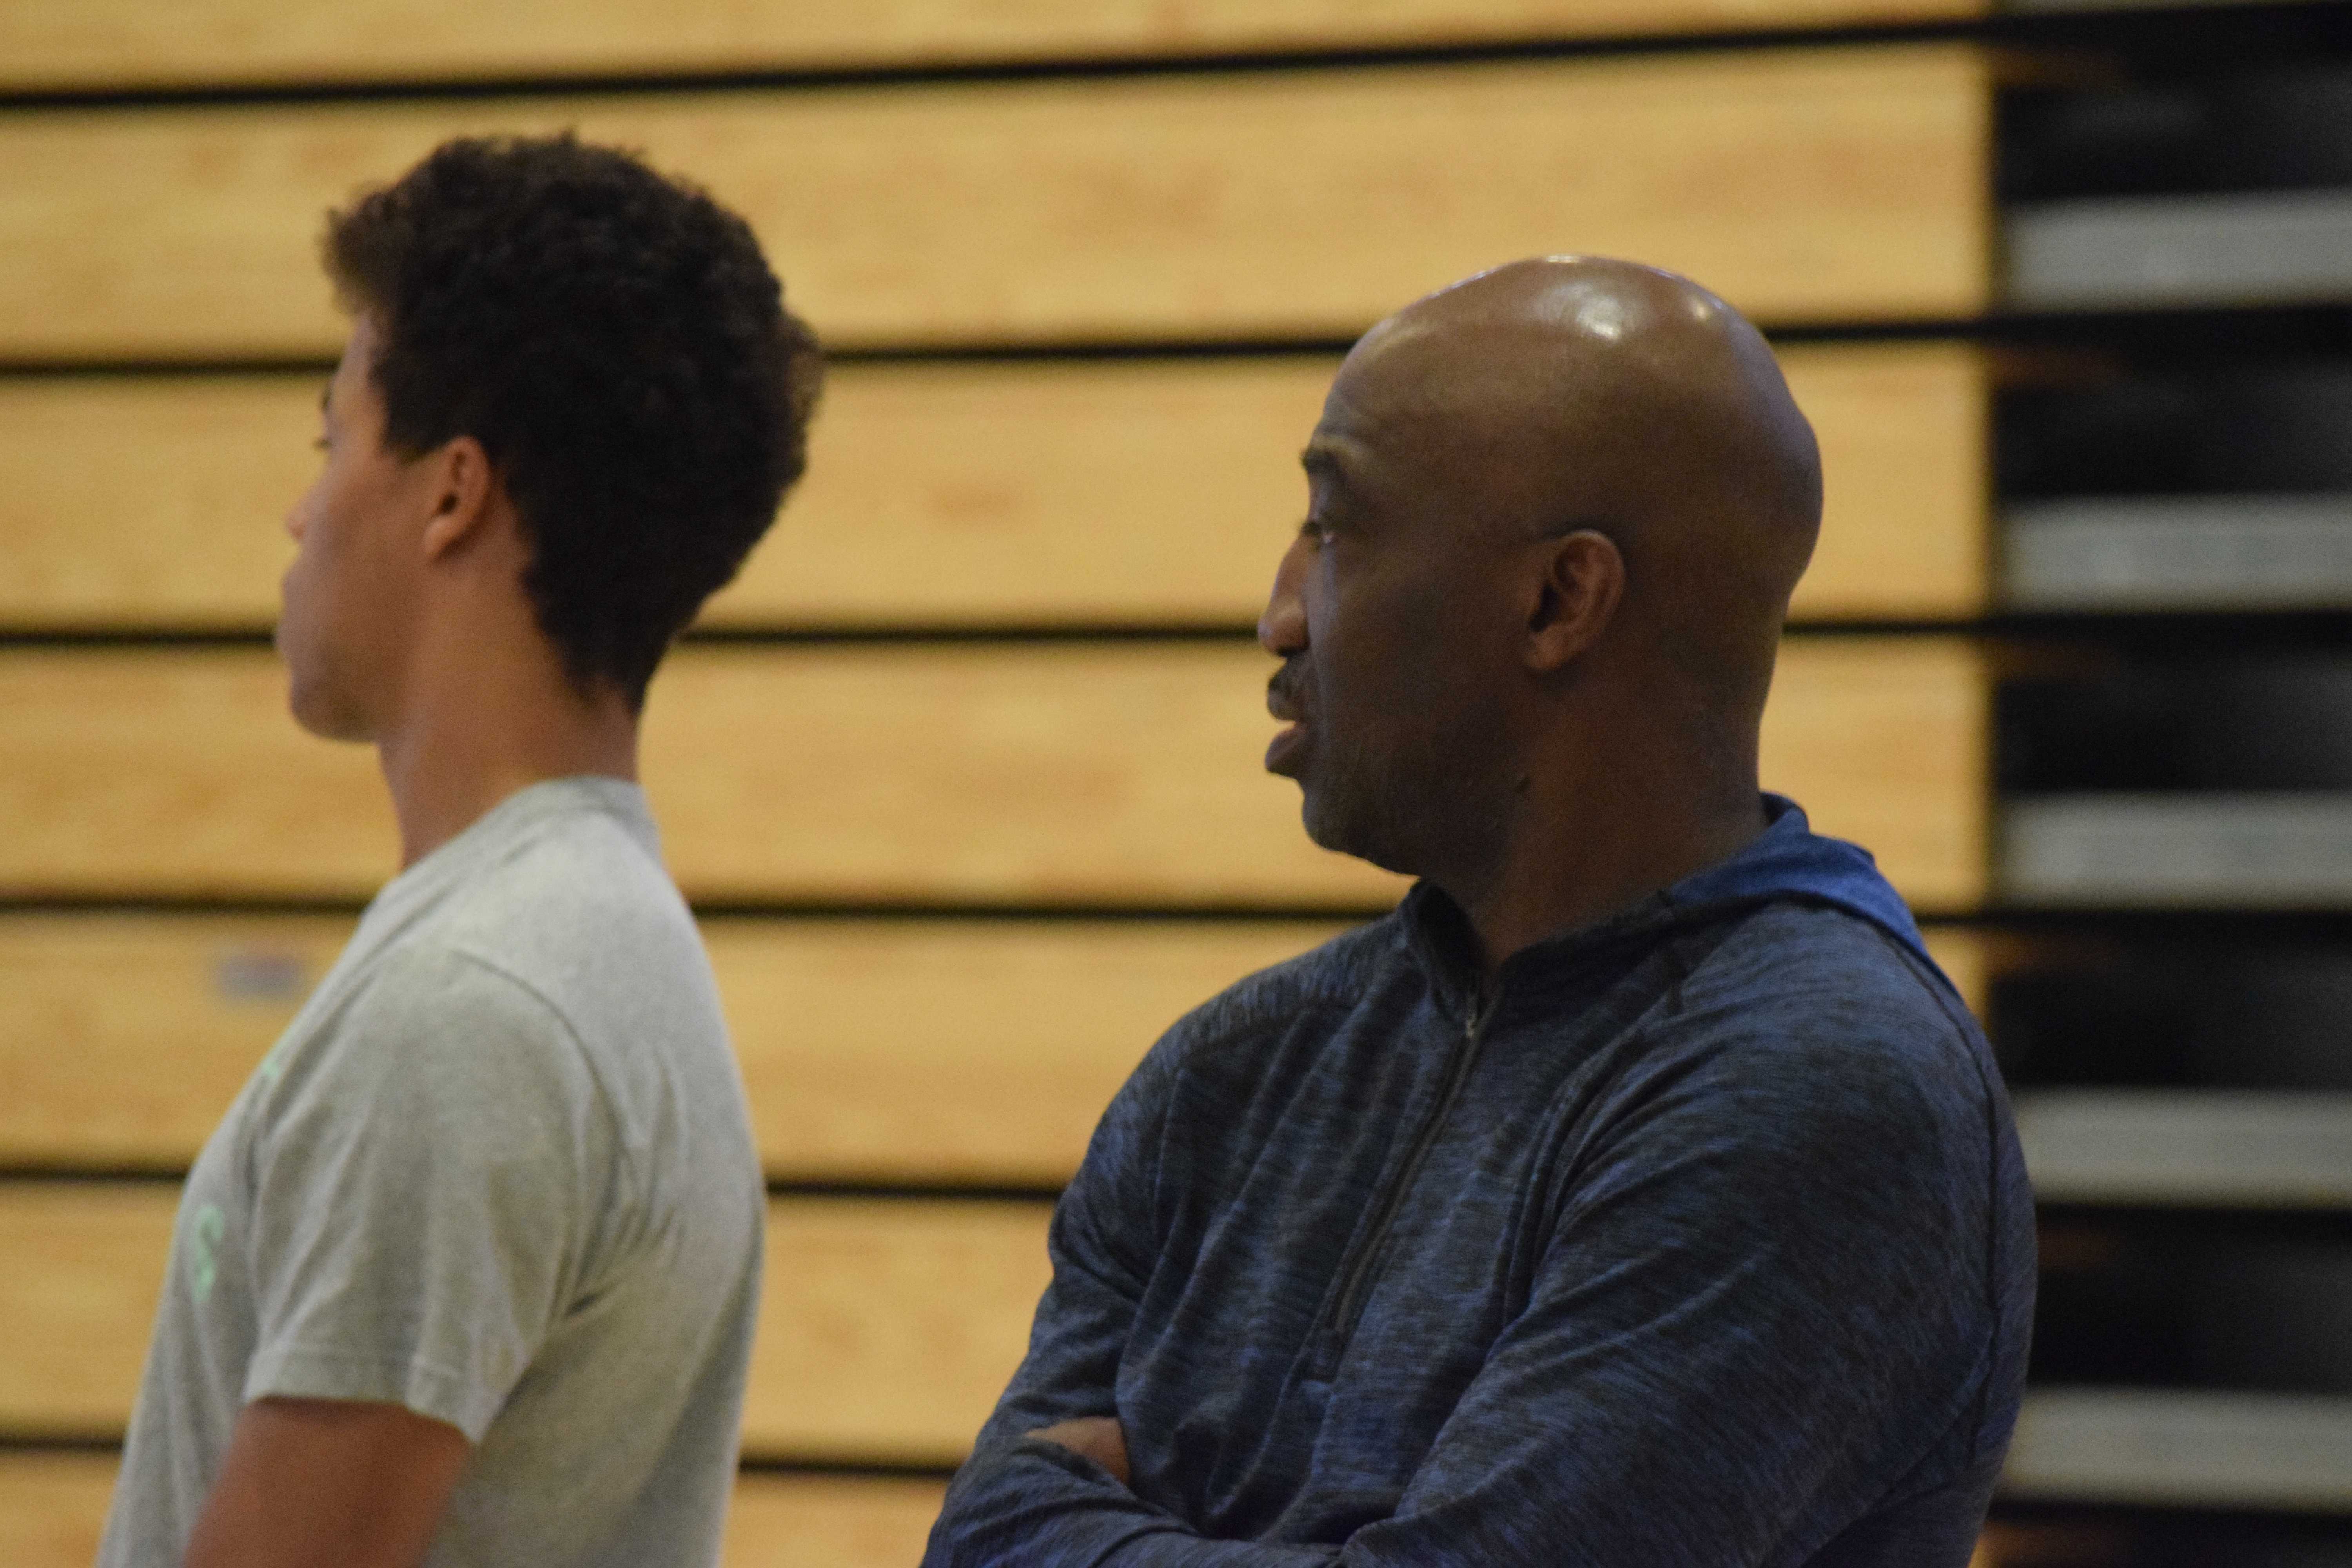 New boys basketball head coach Rodney Tention (left) observes a scrimmage to gauge the skills of his players next year. Tention has years of coaching experience, and looks to improve the team during his time here at Paly. “I want to challenge them, but make sure they understand they are good enough to be a top level team,” Tention said. Photo: Dylan Zou